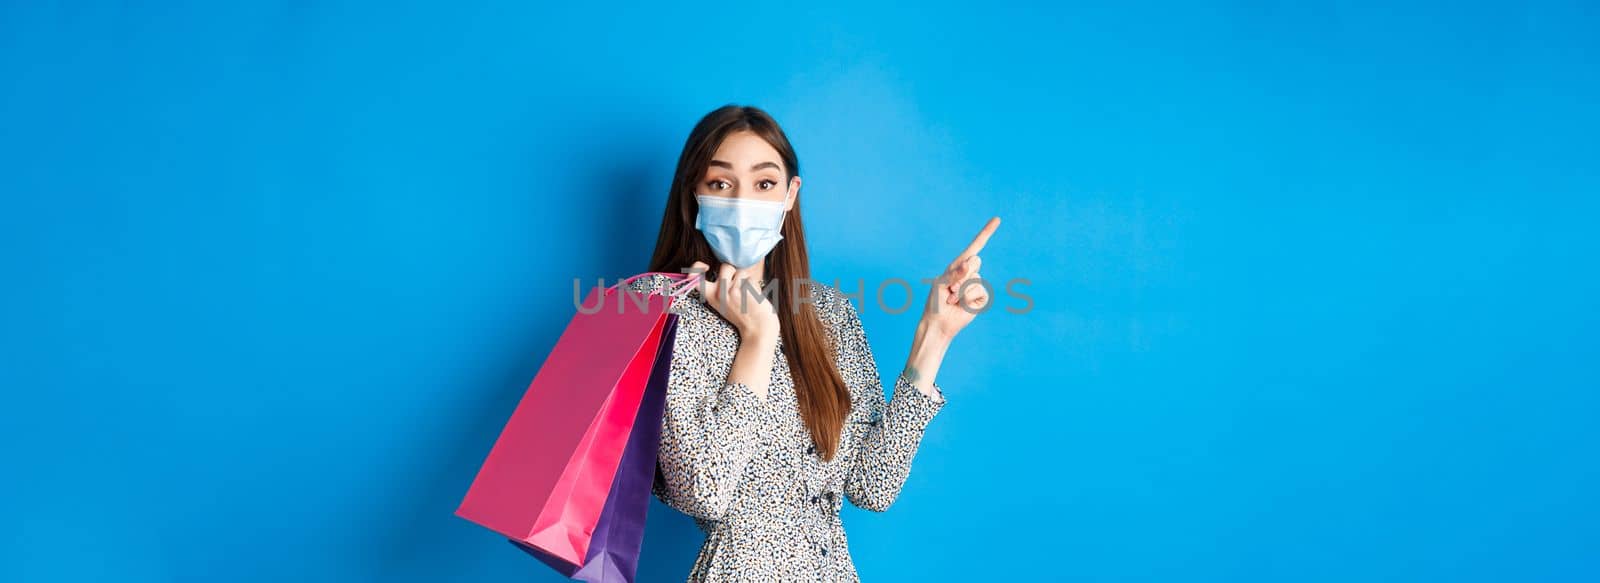 Covid-19, pandemic and lifestyle concept. Excited woman wears medical mask on shopping, pointing left corner logo, holding bags over shoulder, blue background by Benzoix